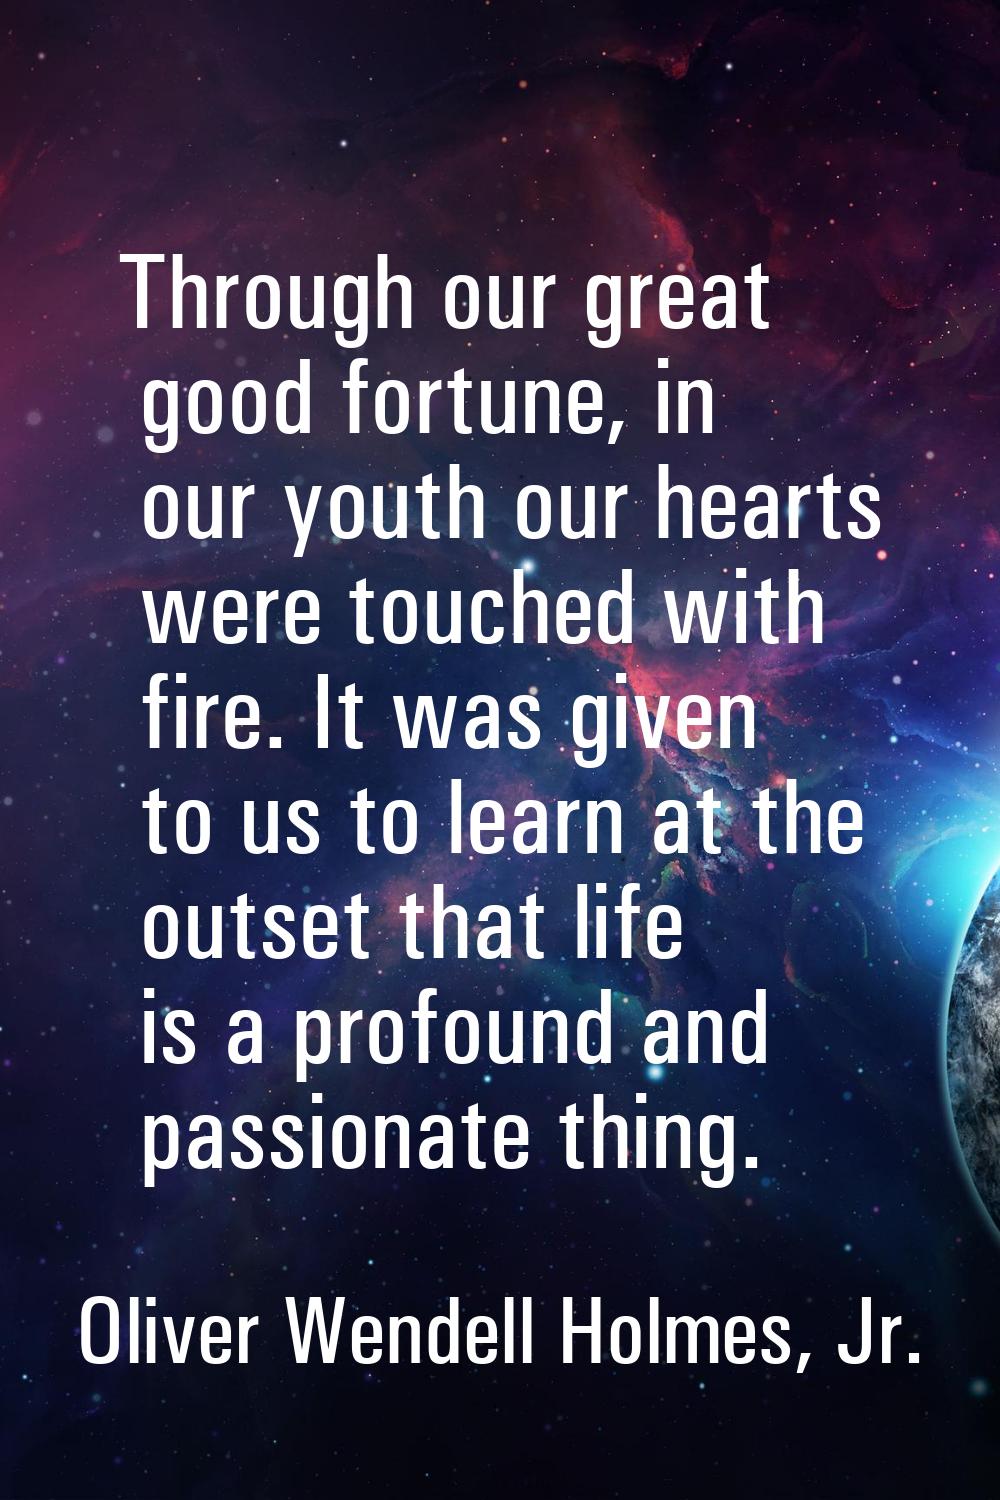 Through our great good fortune, in our youth our hearts were touched with fire. It was given to us 